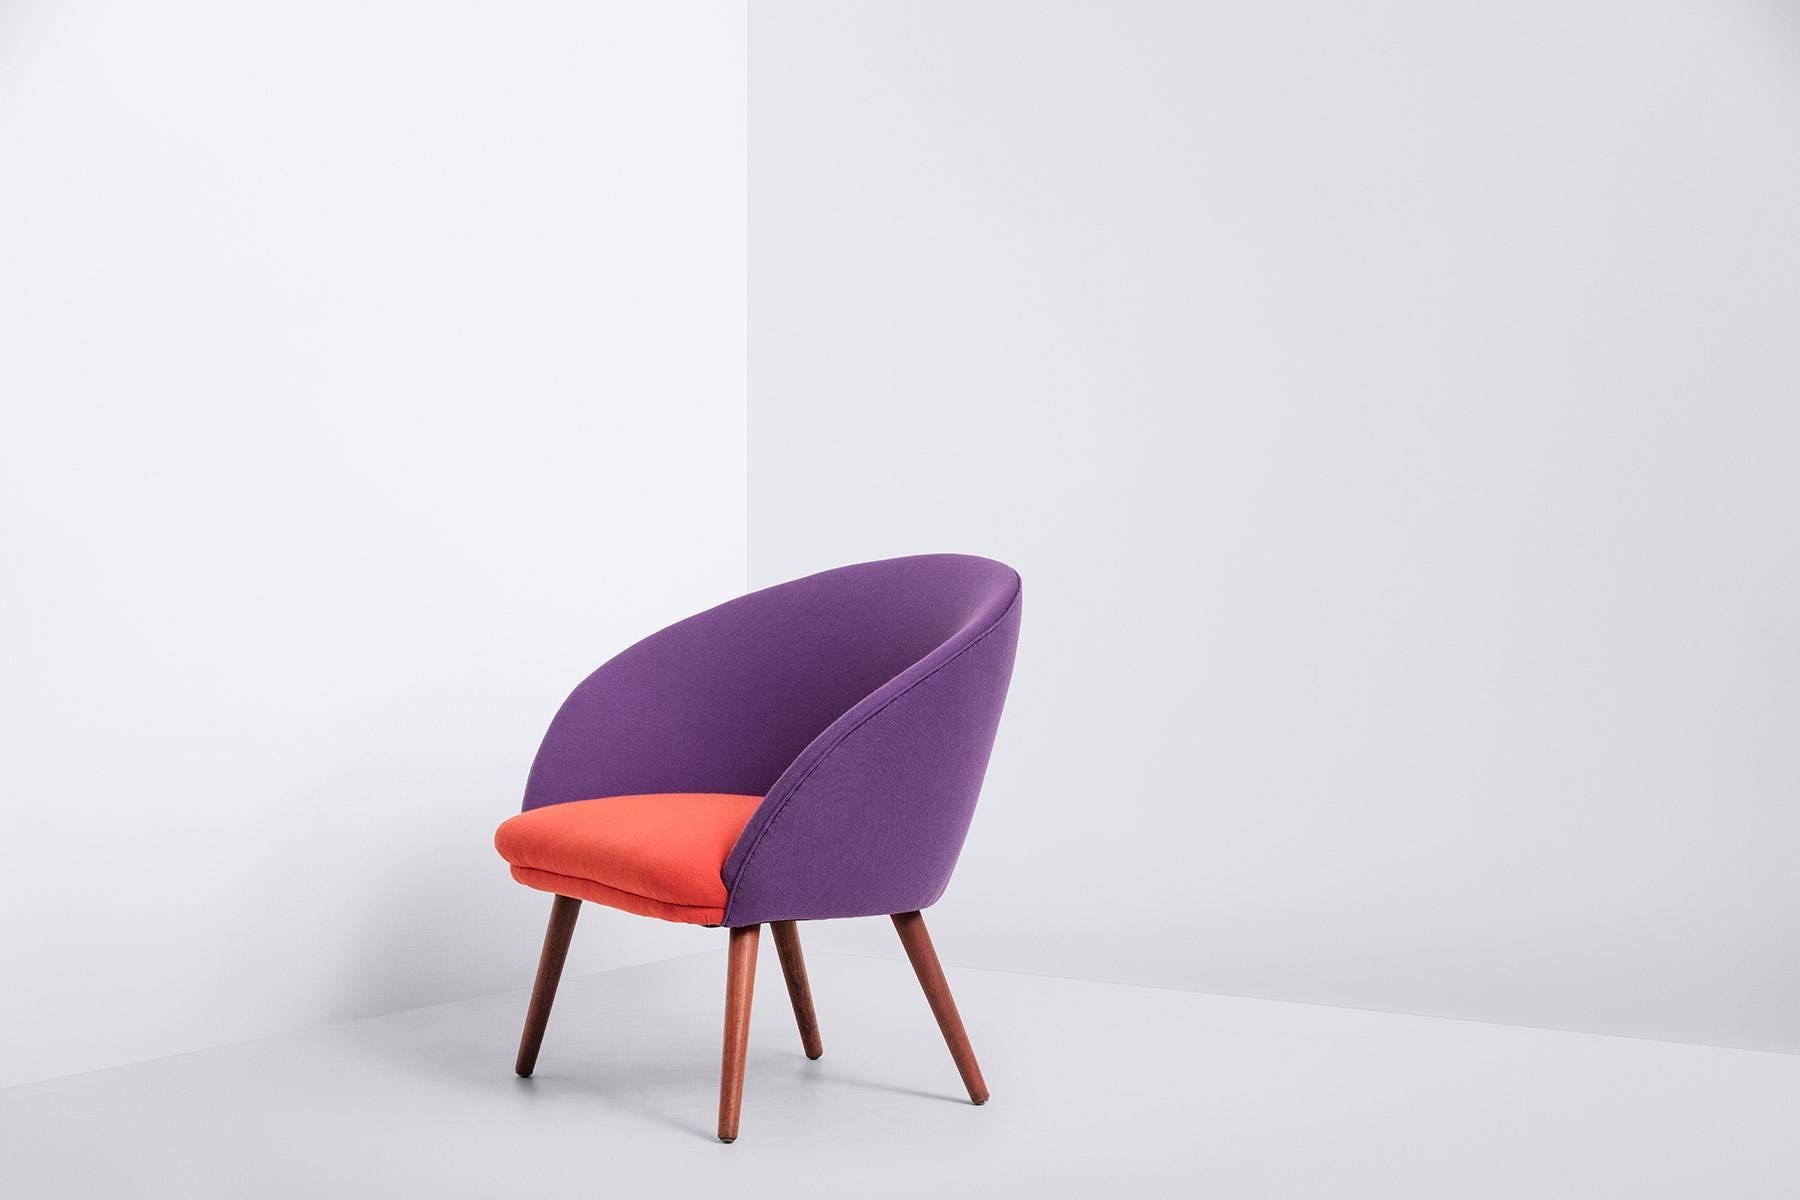 Danish produced cocktail chair from the 1950s in orange & purple wool upholstery from Danish Kvardat Textiles.
The legs of solid teak and in a good condition with minor wear, consistent with age and use, preserving a wonderful patina.
Dimensions: